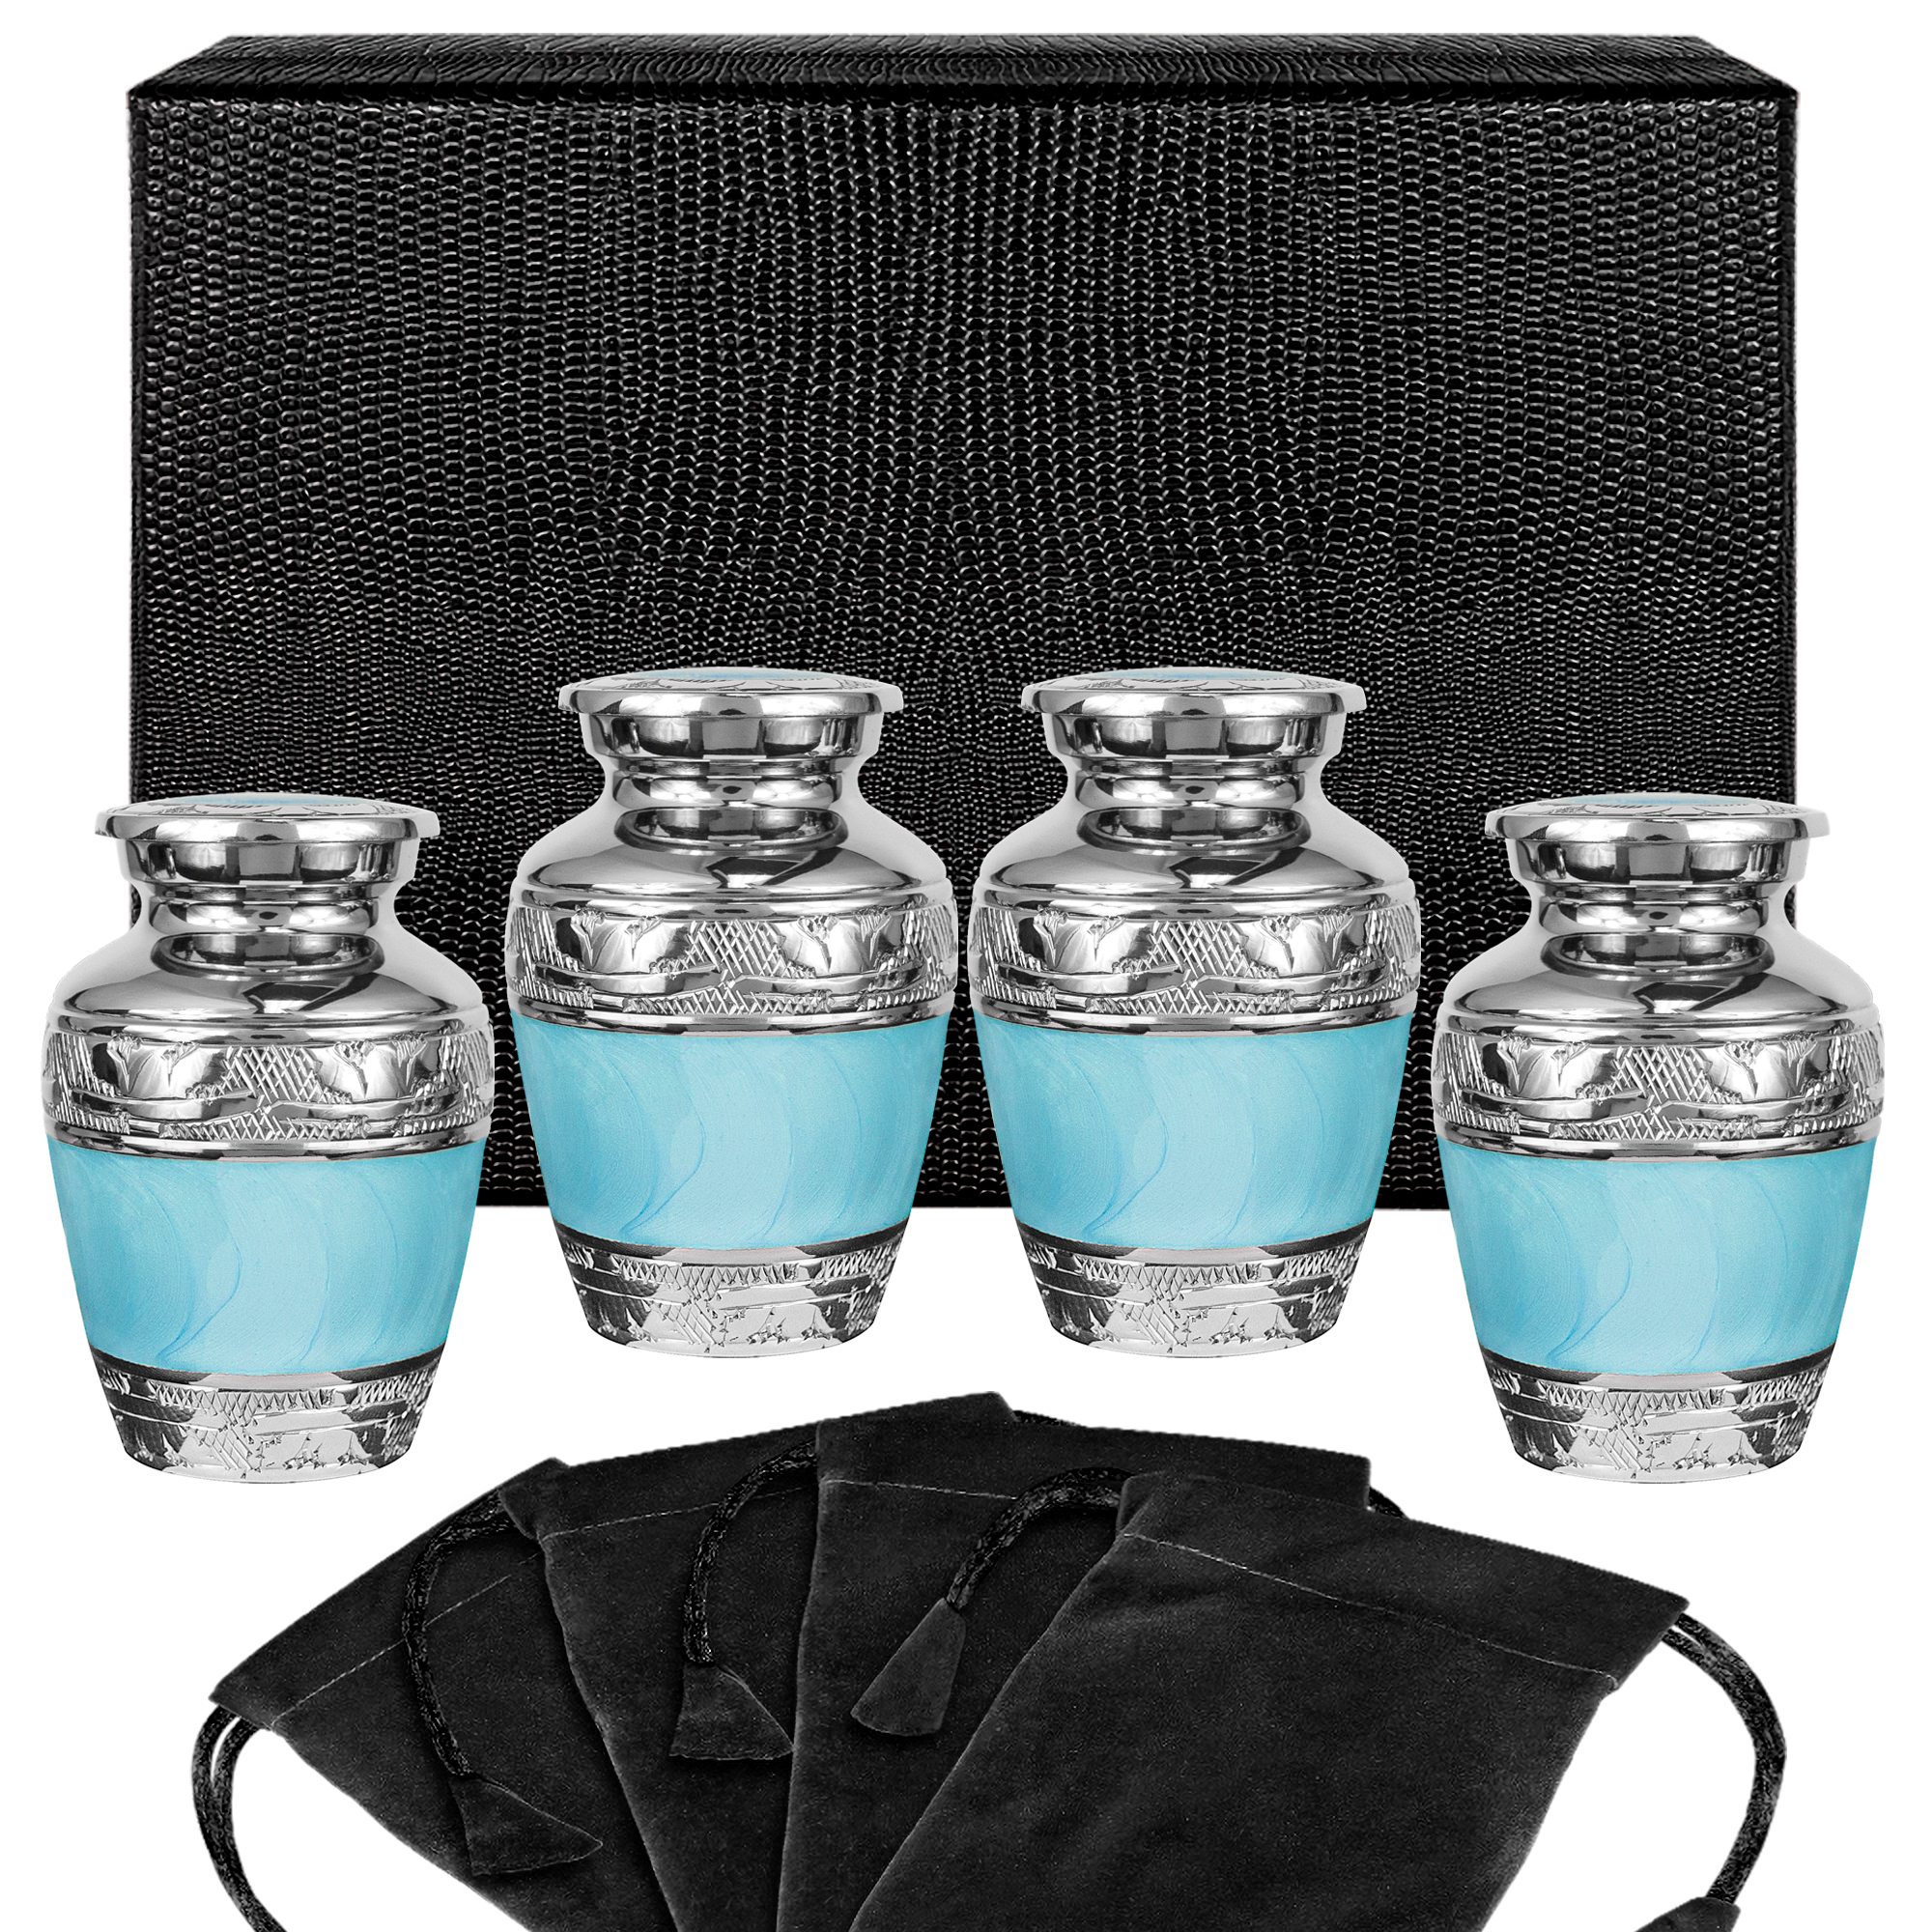 Reminded Small Cremation Urns for Human Ashes Mini Keepsake Set of 4 Blue and Silver with Velvet Case